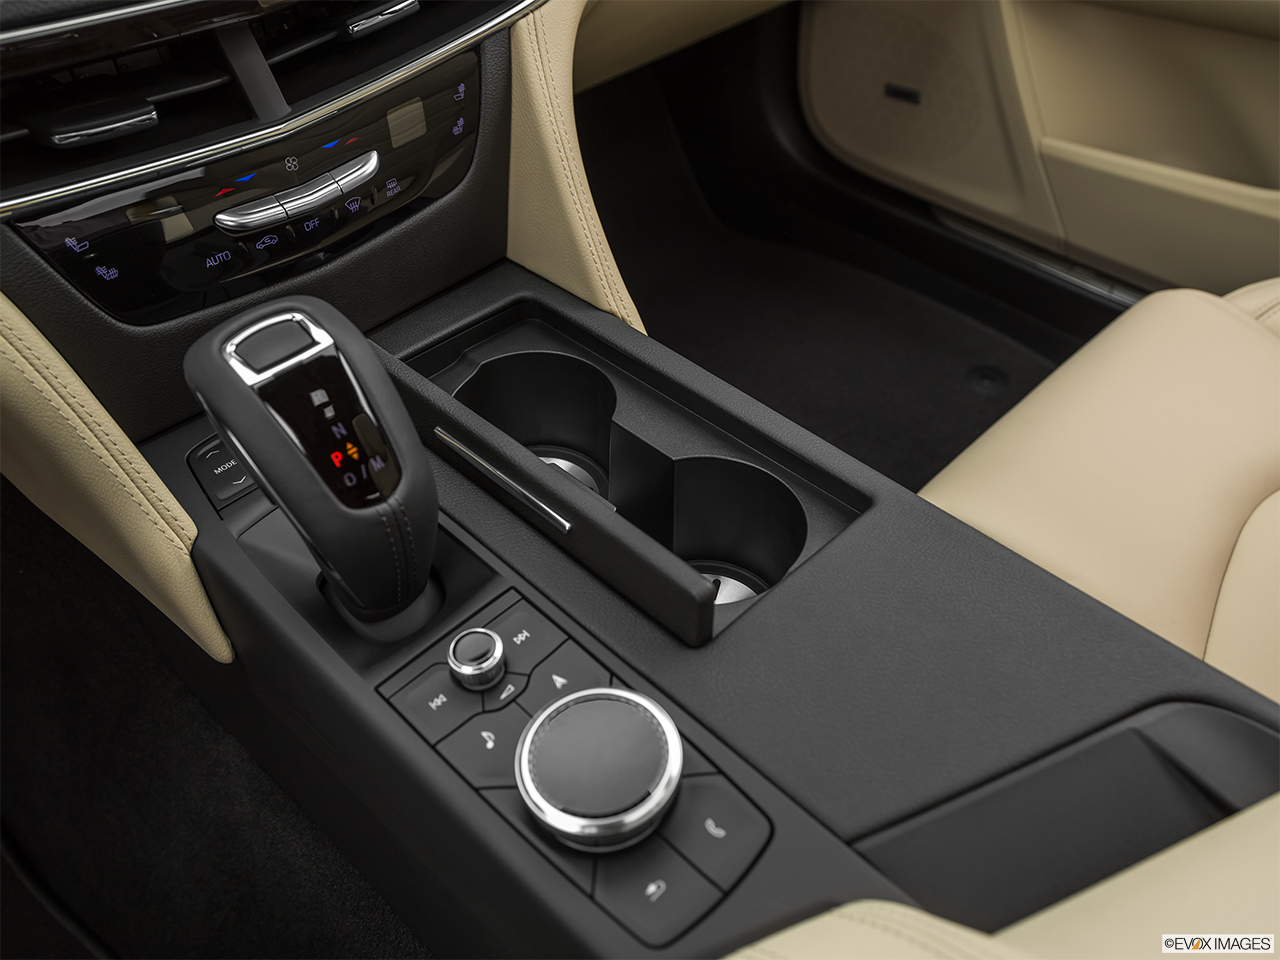 2020 Cadillac CT6 Luxury Cup holders. 